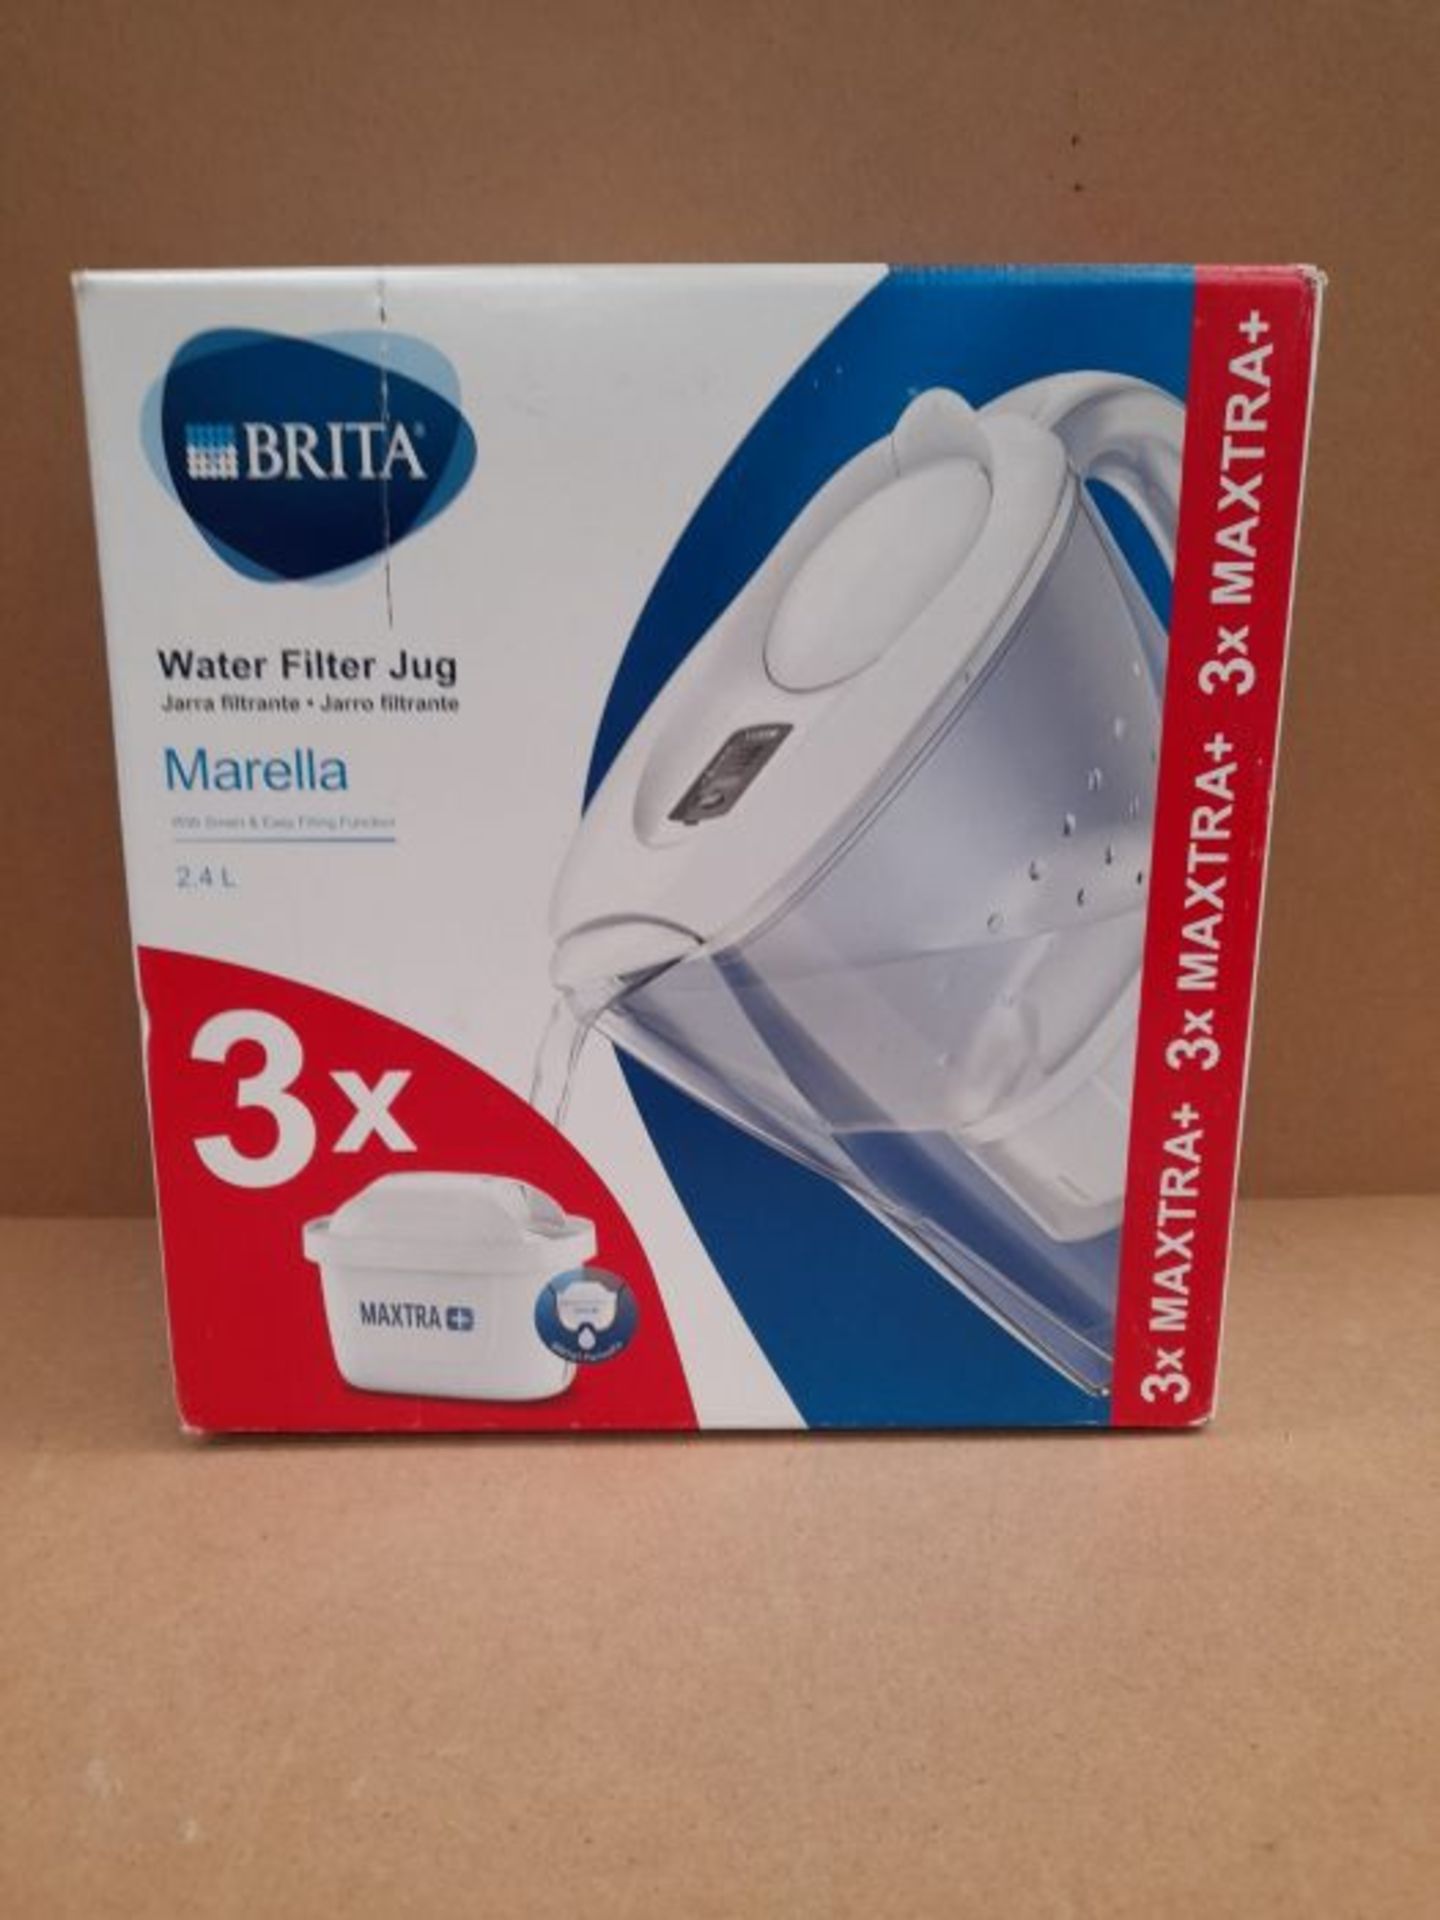 BRITA Marella fridge water filter jug for reduction of chlorine, limescale and impurit - Image 2 of 3